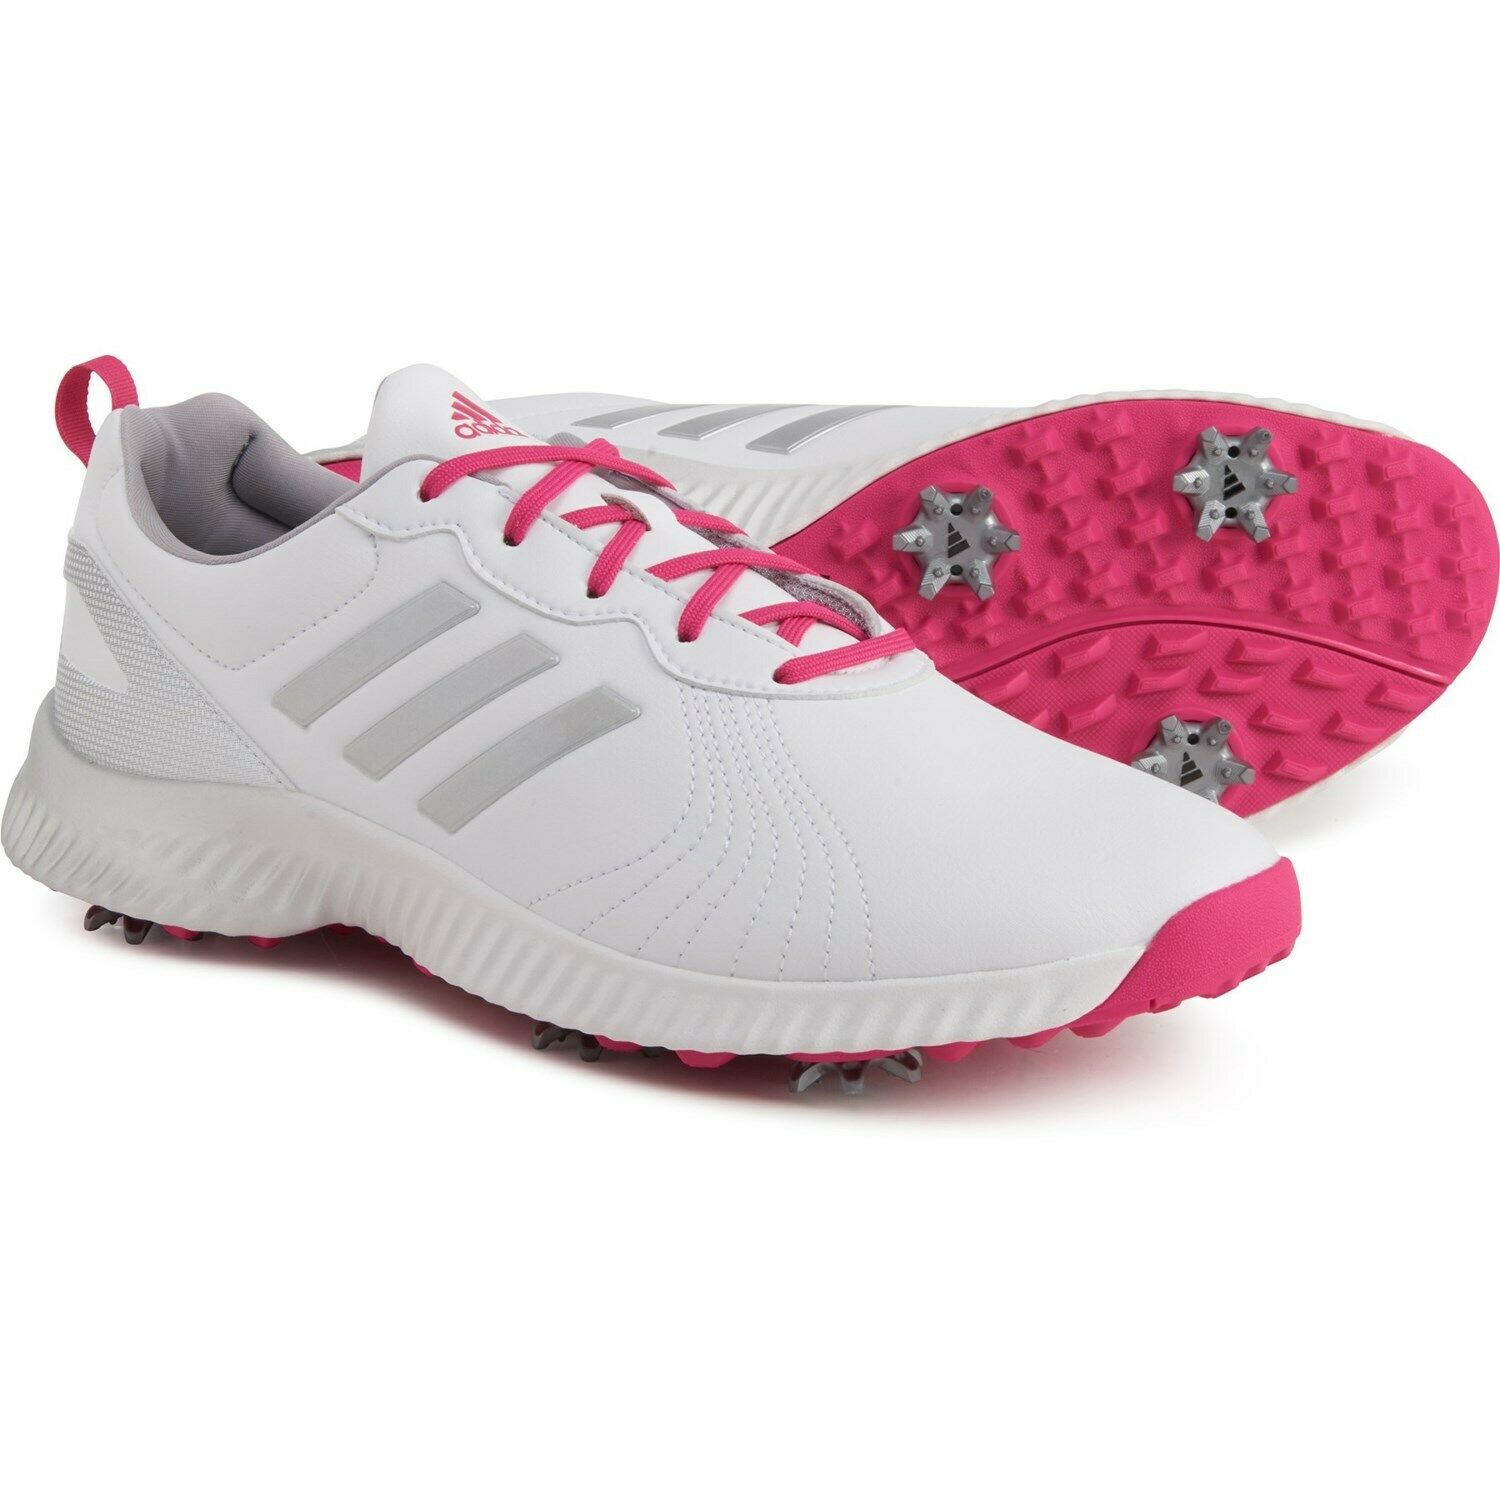 Adidas Women's Golf Shoes White Pink Silver Size11 Waterproof